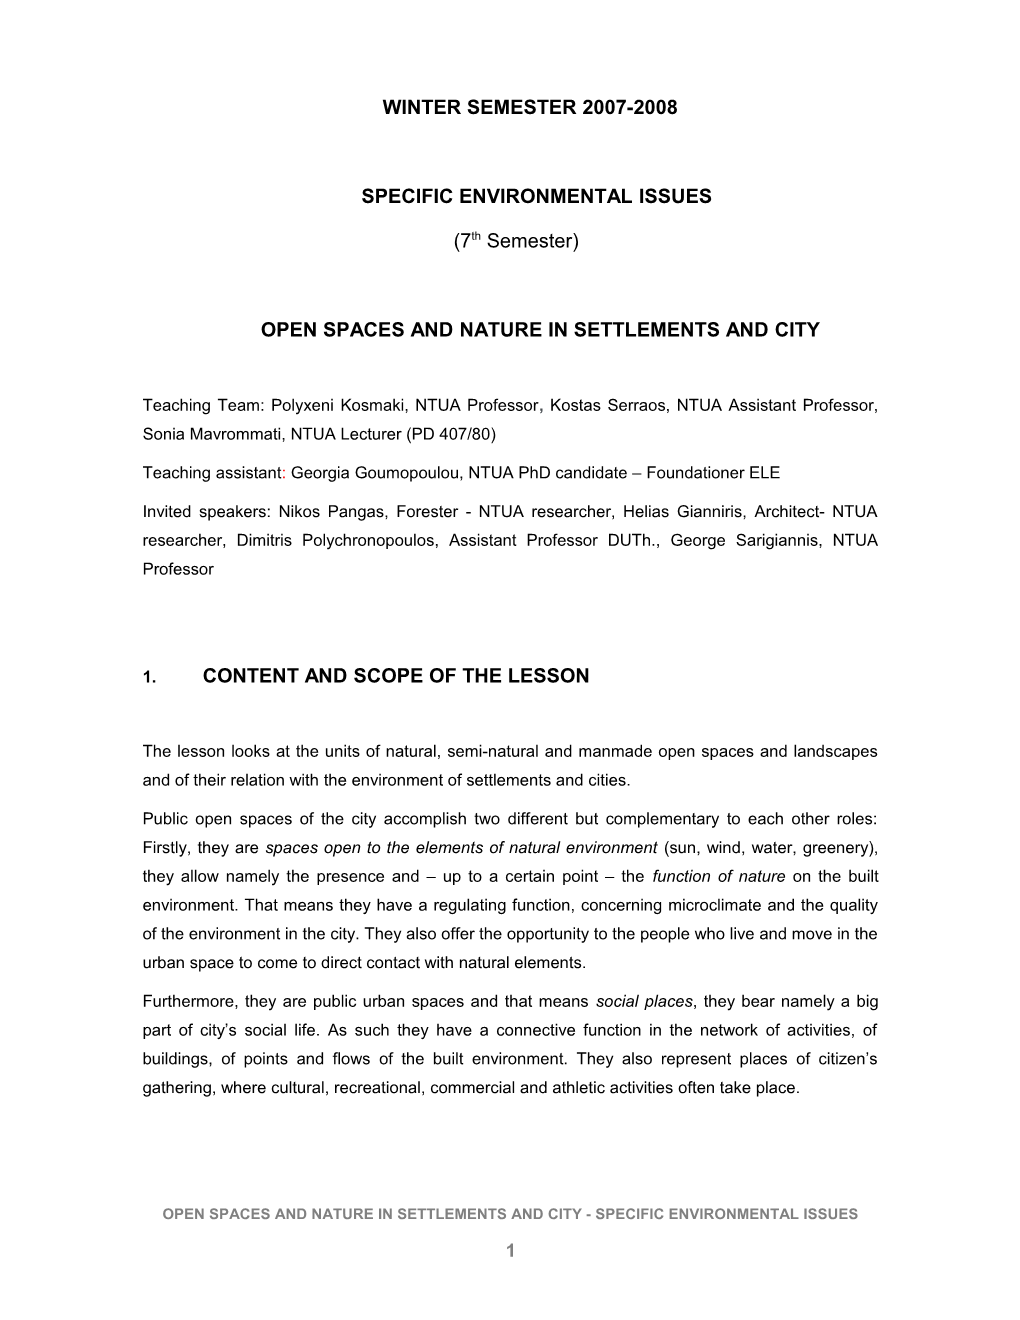 Open Spaces and Nature in Settlements and City